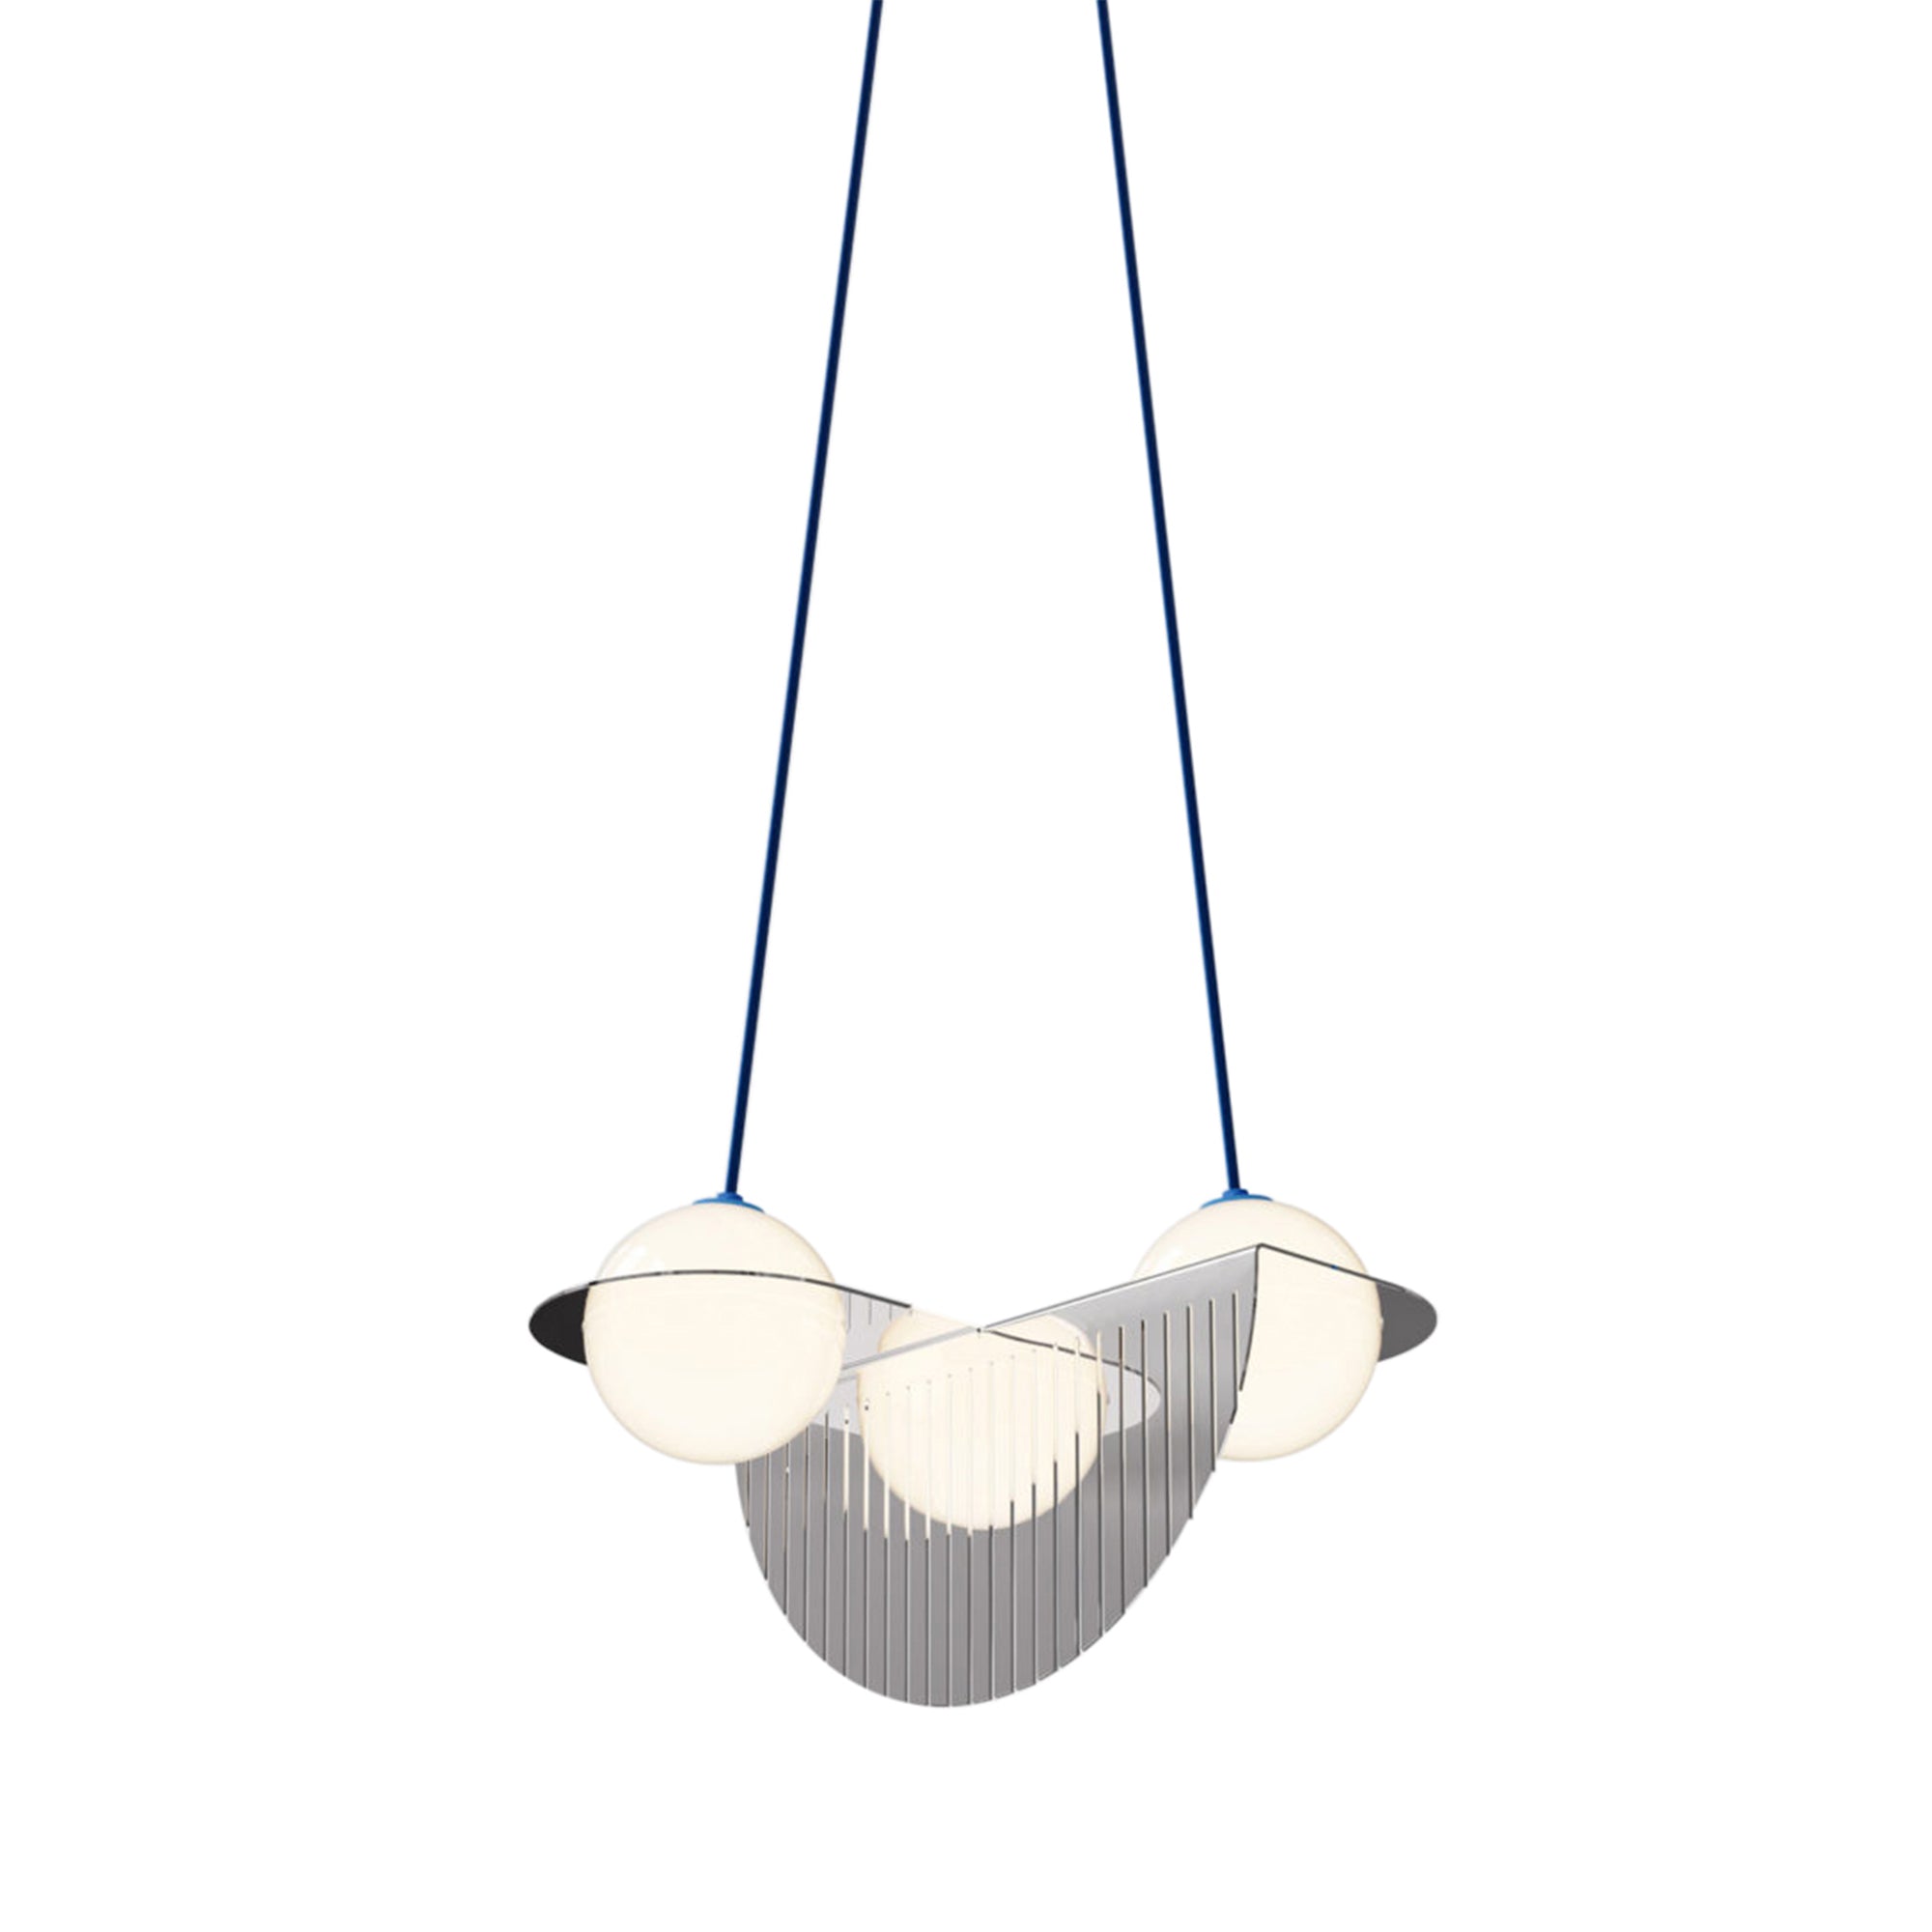 Laurent 09 Suspension Lamp: Nickel Plated + Blue + Angled Wires